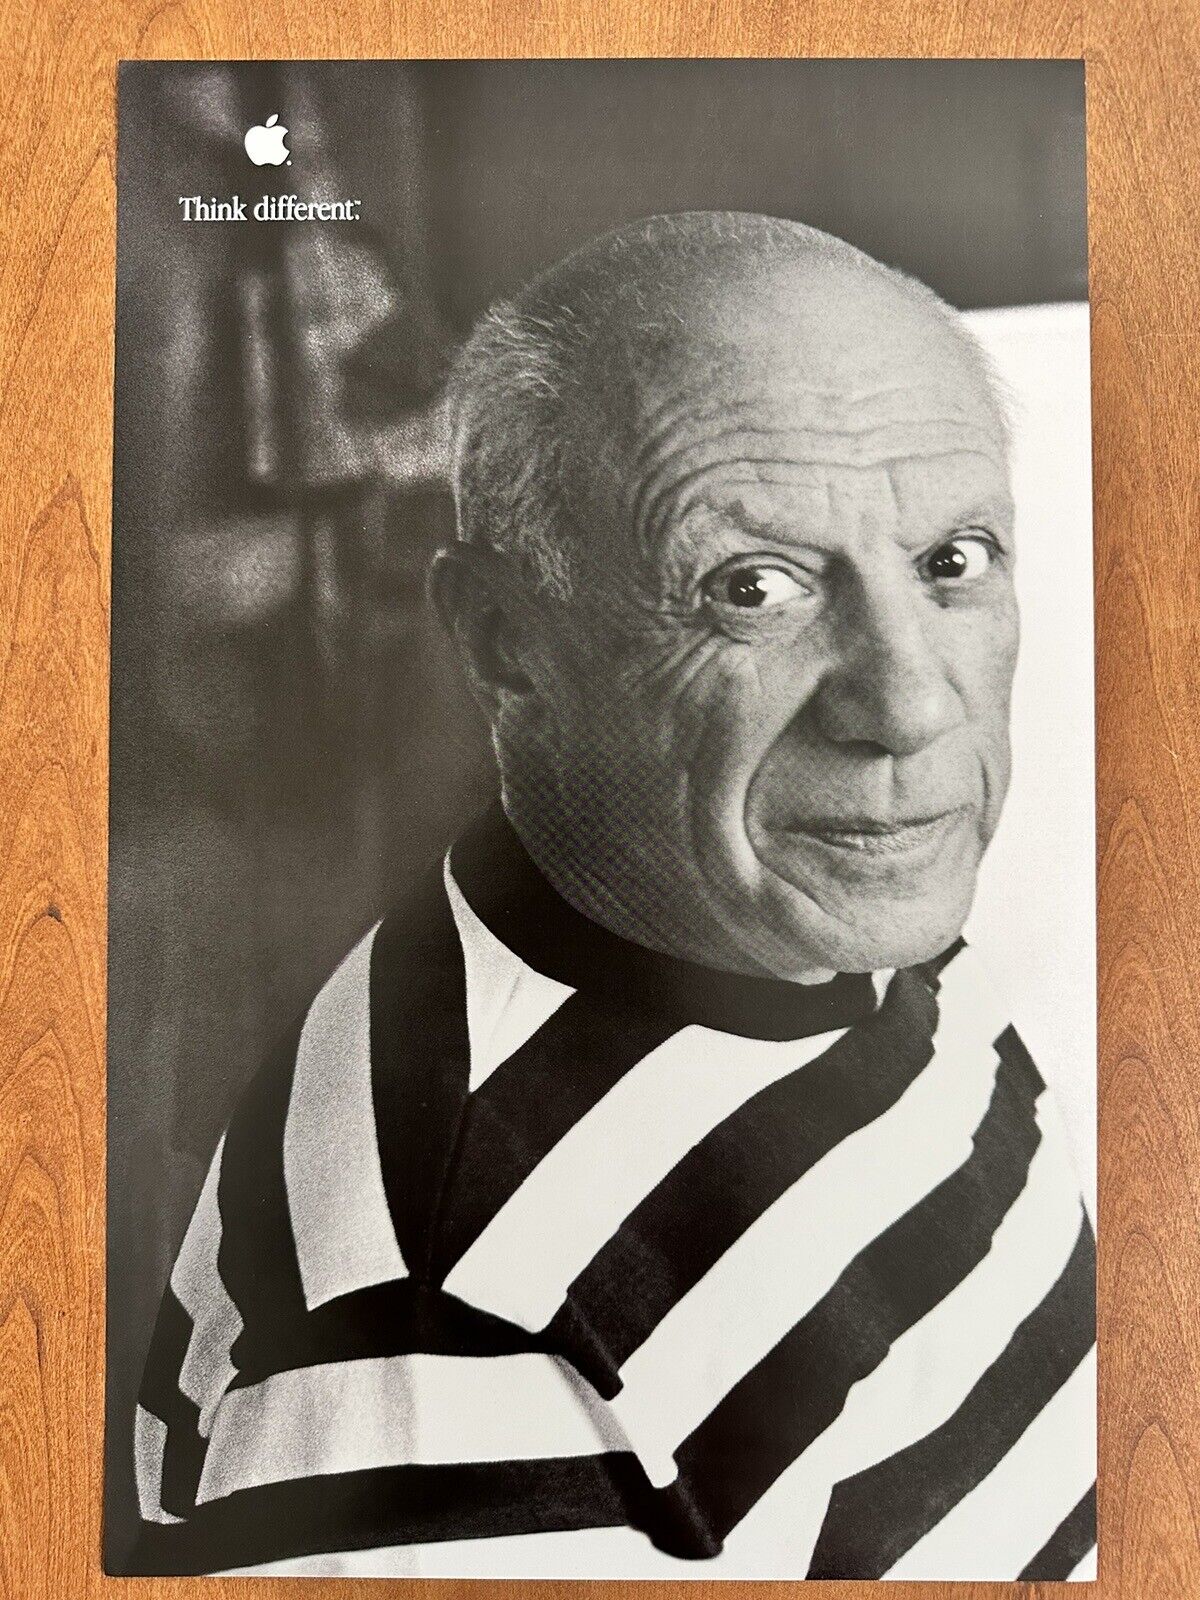 NEW Apple  Think Different Pablo Picasso Genius Poster 11x17” 2000